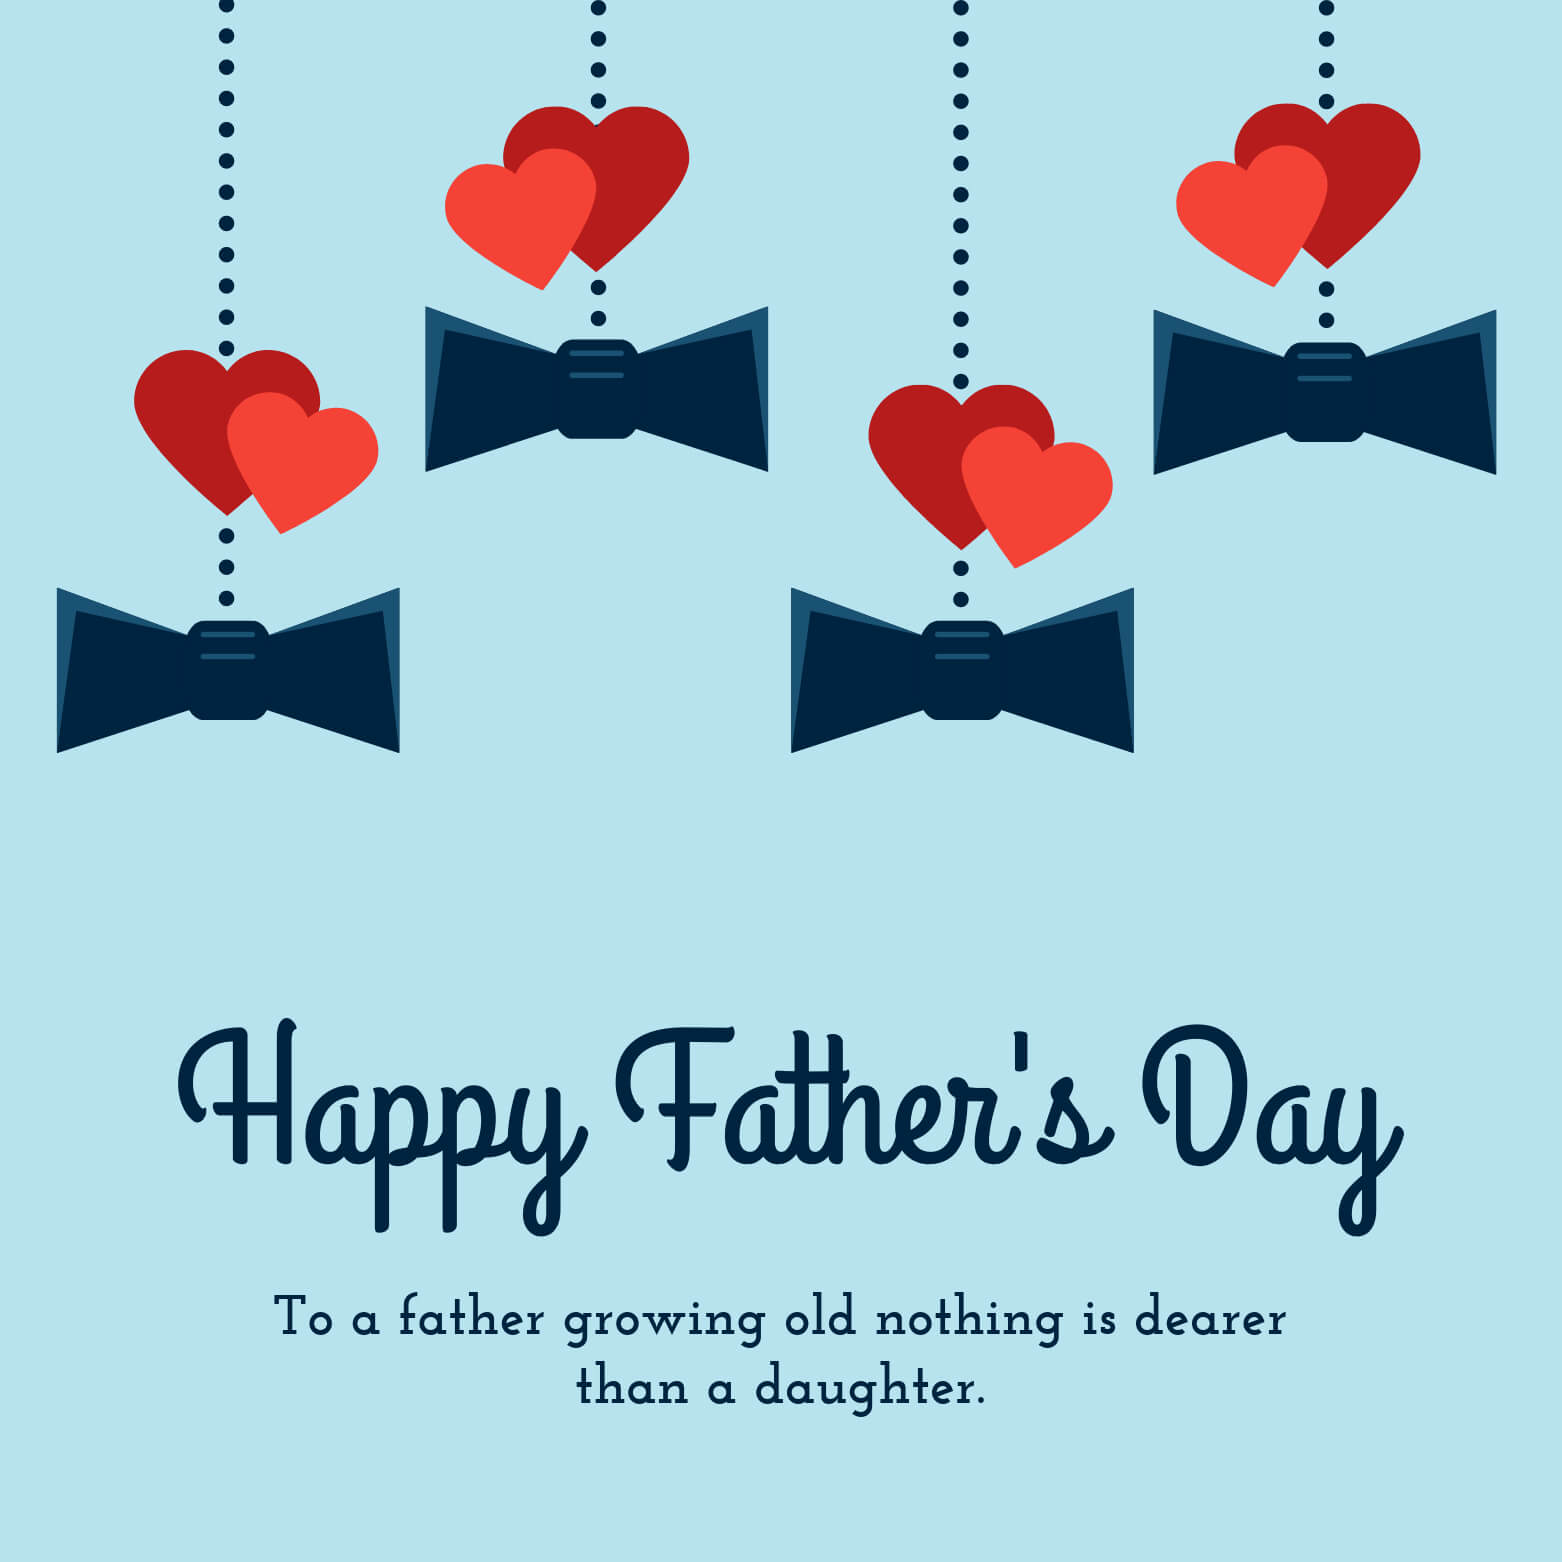 15+ Fun Father's Day Card Templates To Show Your Dad He's #1 Intended For Fathers Day Card Template